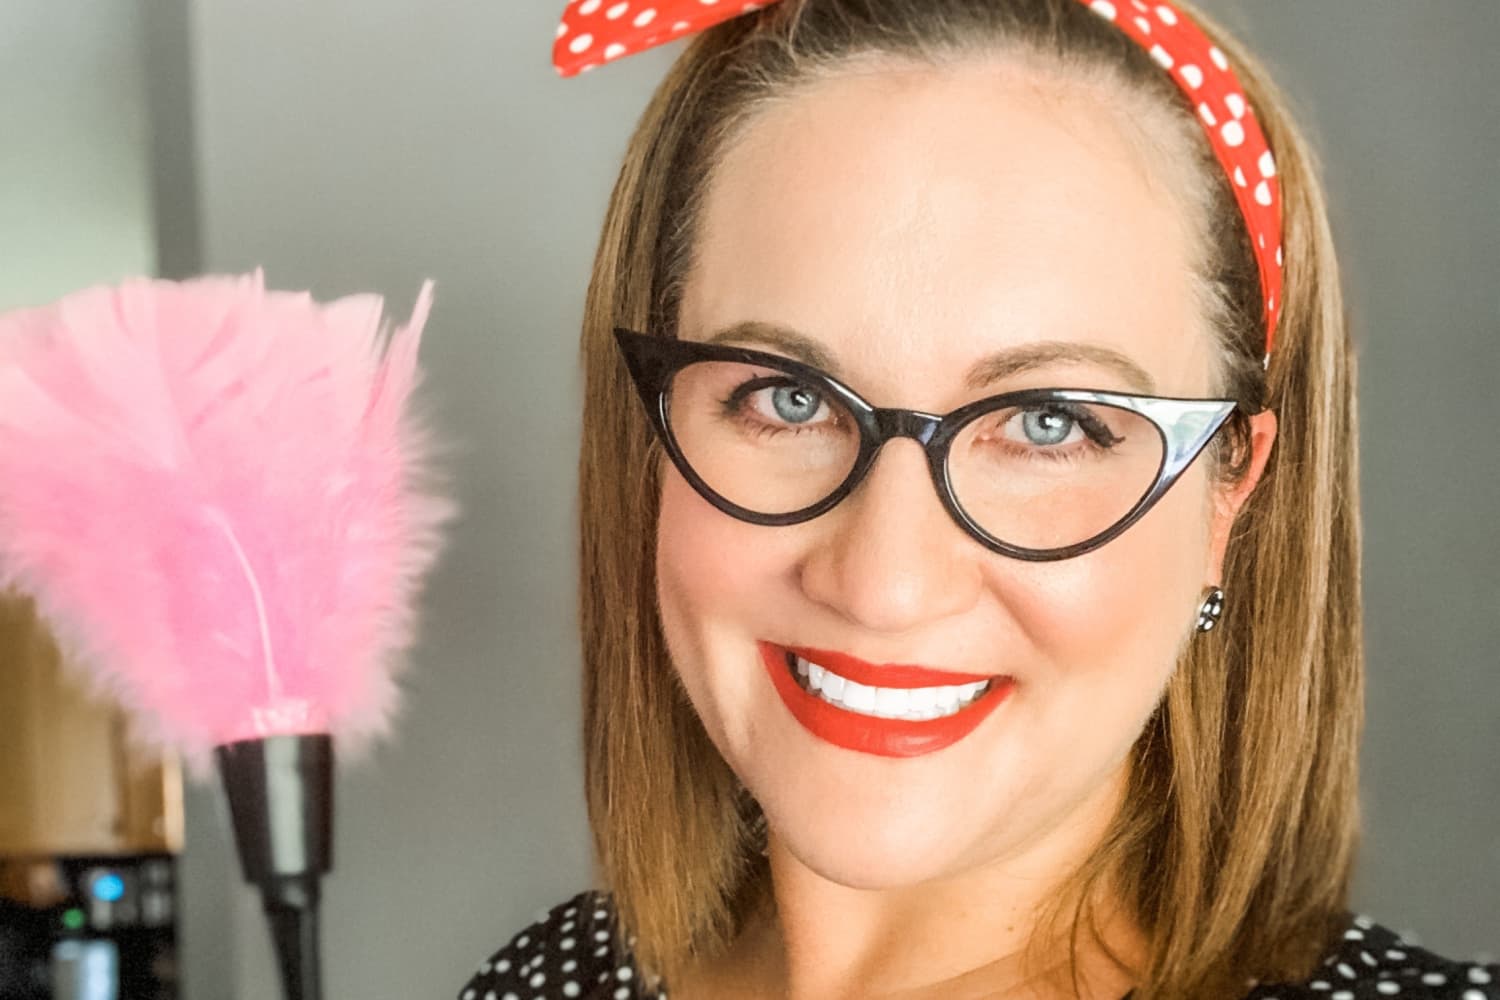 6 Old-School Cleansing Suggestions from YouTuber Contemporary Mama